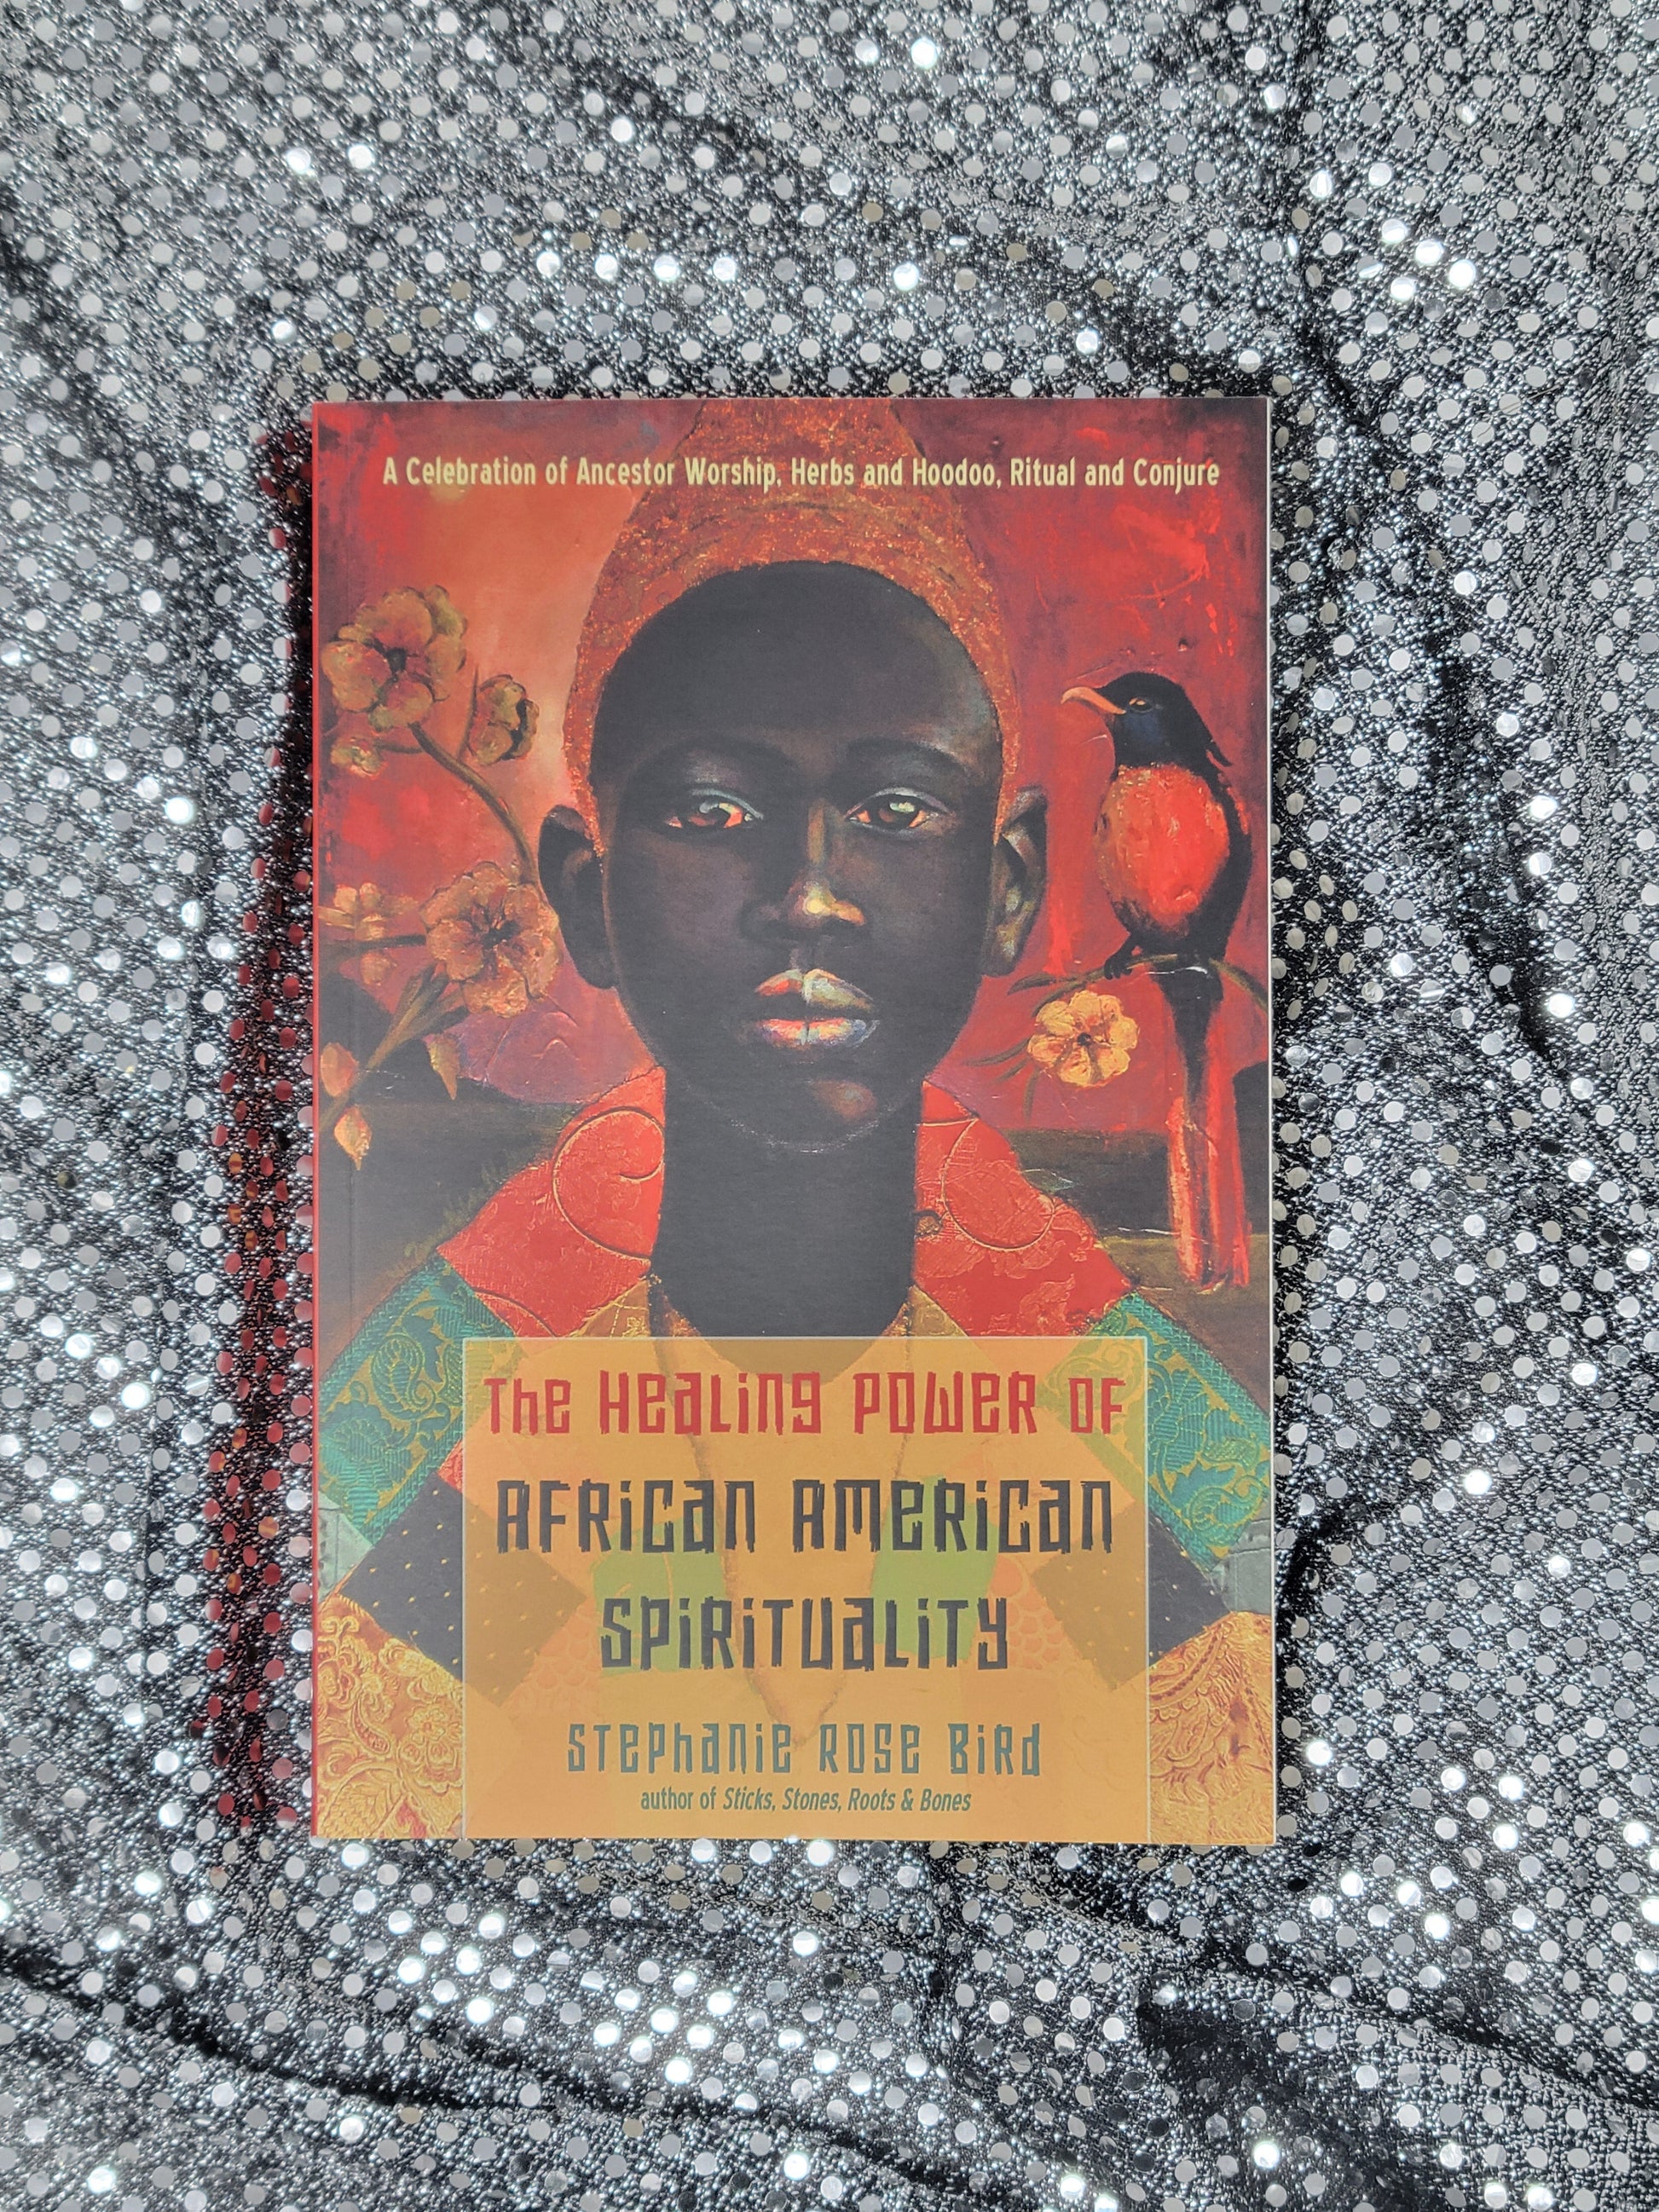 The Healing Power of African-American Spirituality A Celebration of Ancestor Worship, Herbs and Hoodoo, Ritual and Conjure - Stephanie Rose Bird